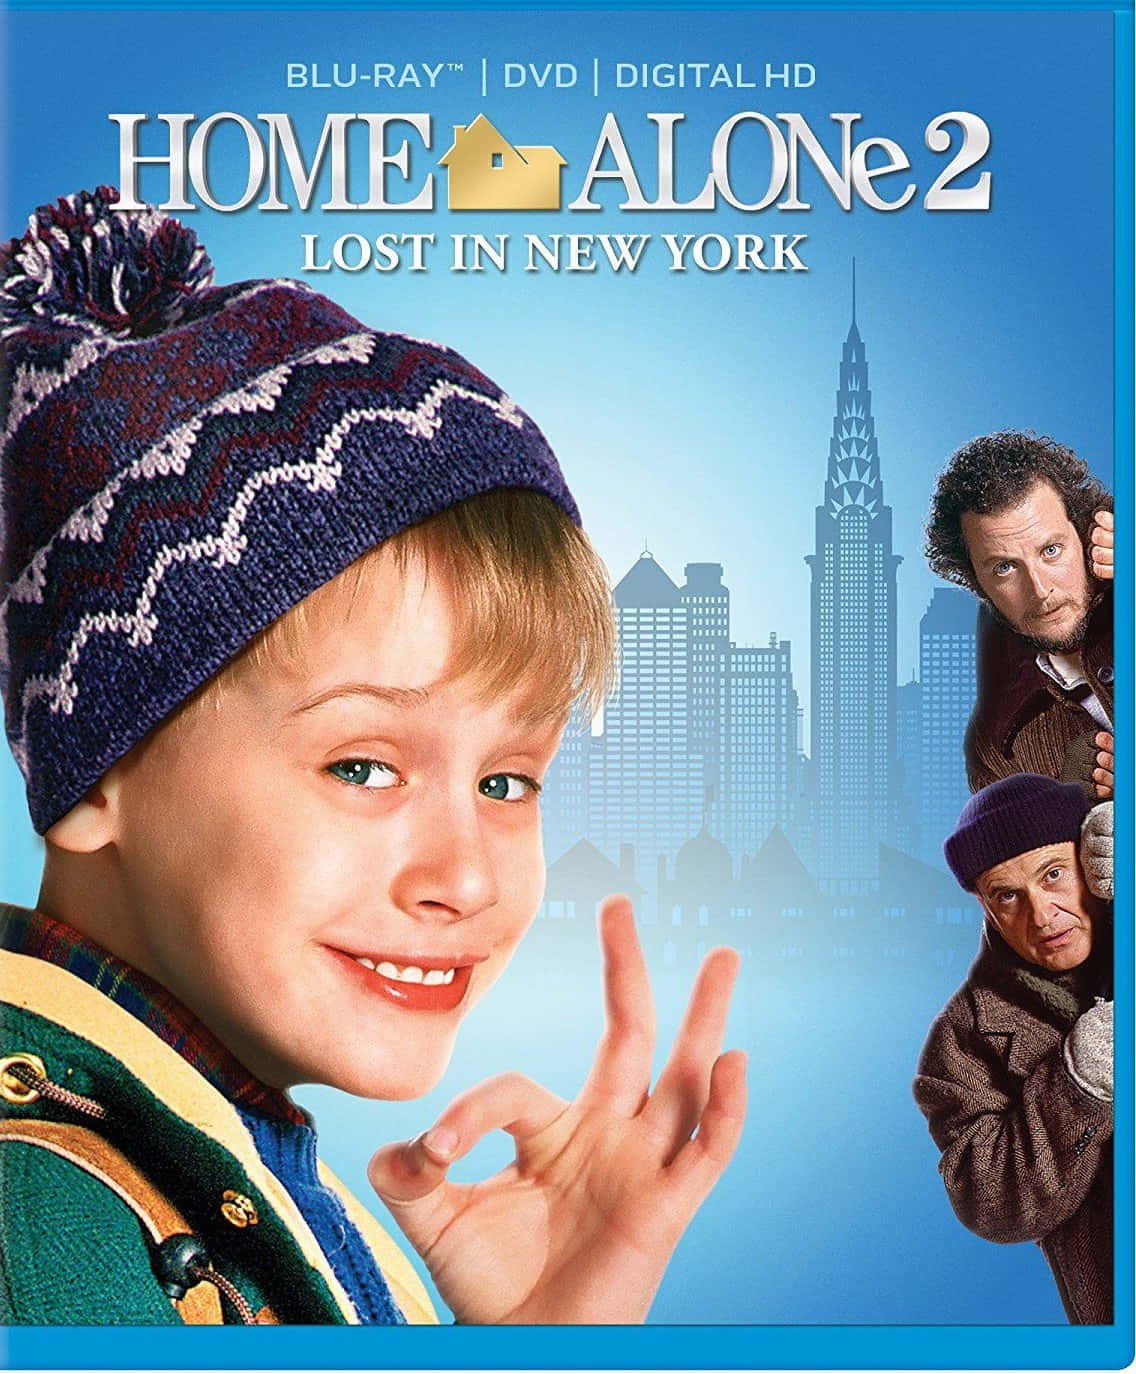 Hilarious moment captured from Home Alone Movie Wallpaper